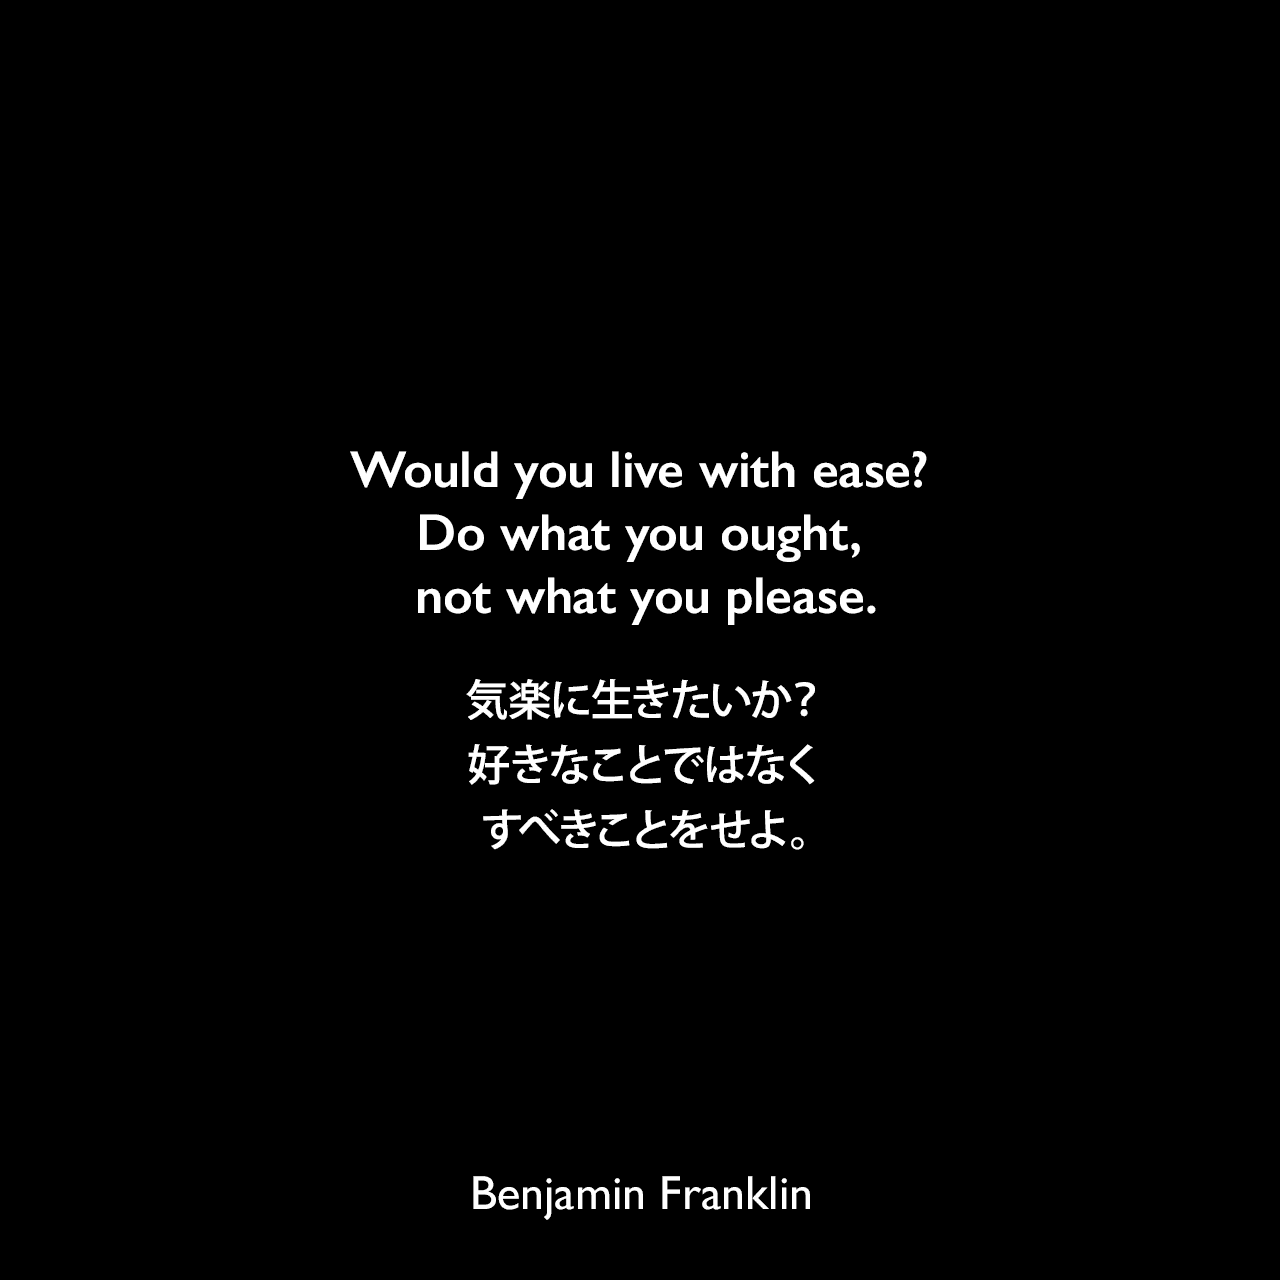 Would you live with ease? Do what you ought, not what you please.気楽に生きたいか？好きなことではなくすべきことをせよ。Benjamin Franklin